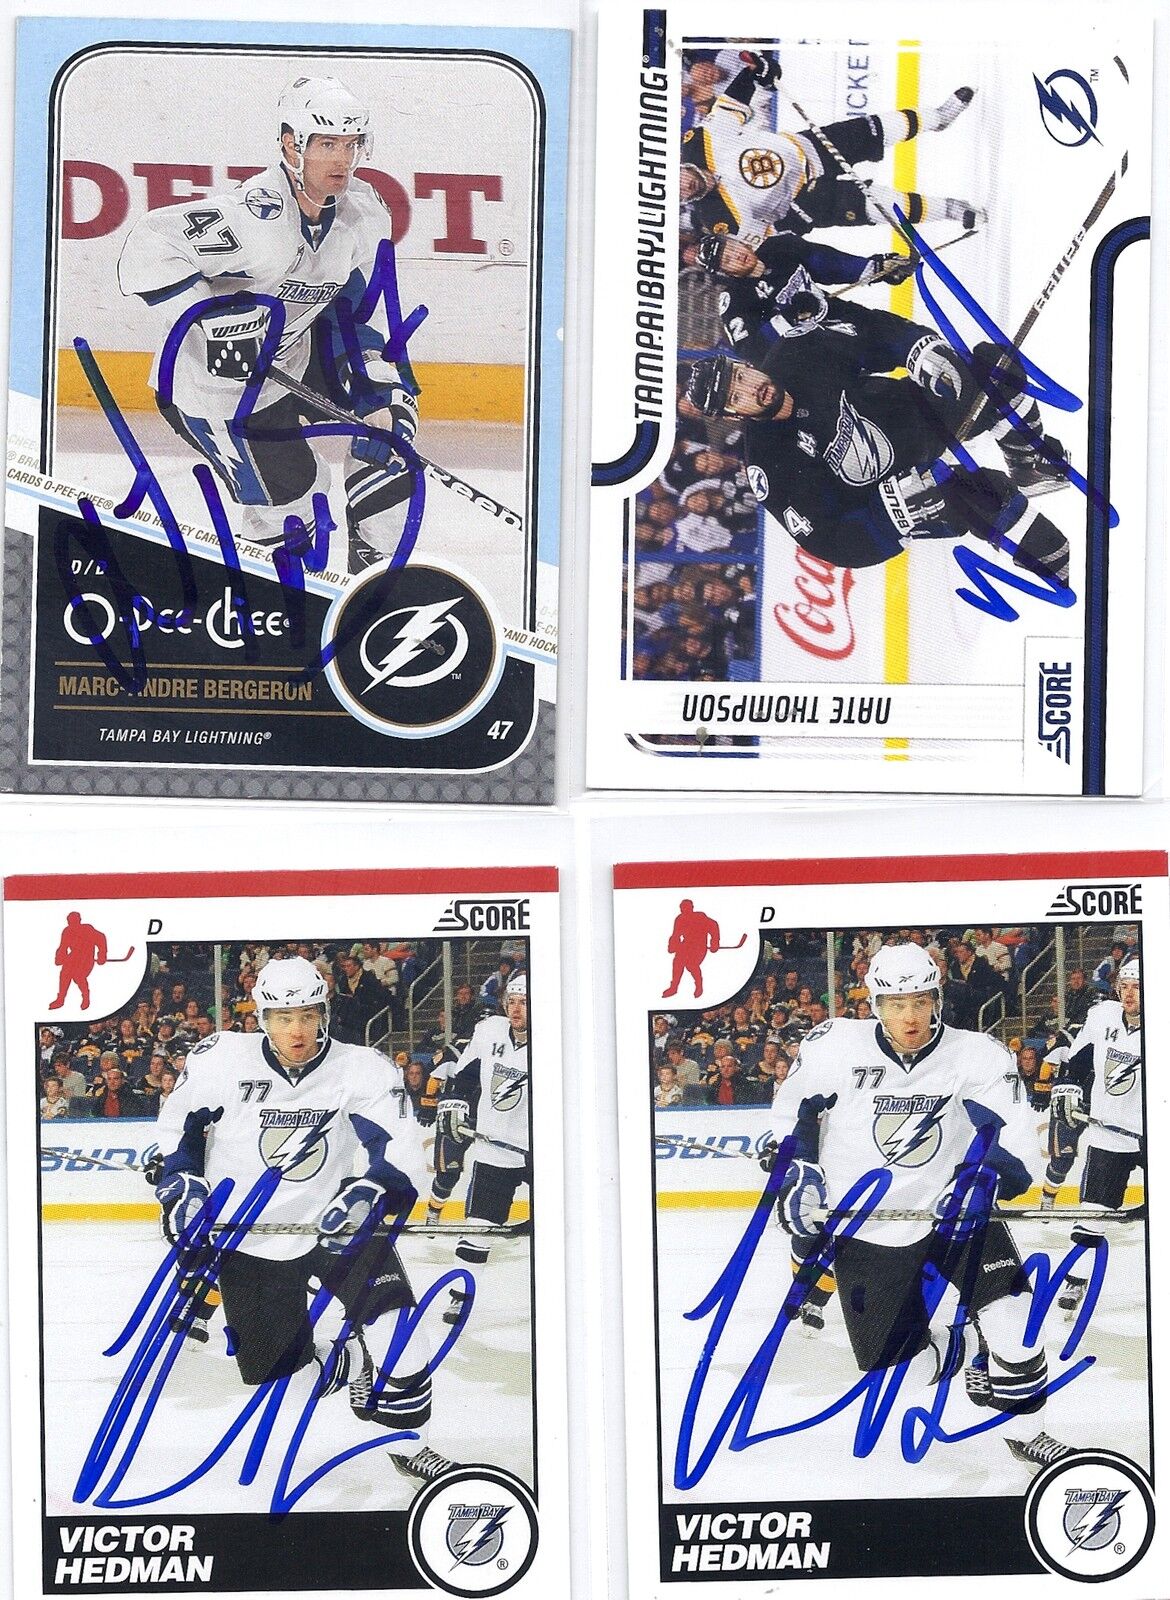 2011 Score #418 Nate Thompson Tampa Bay Lightning Signed Autographed Card